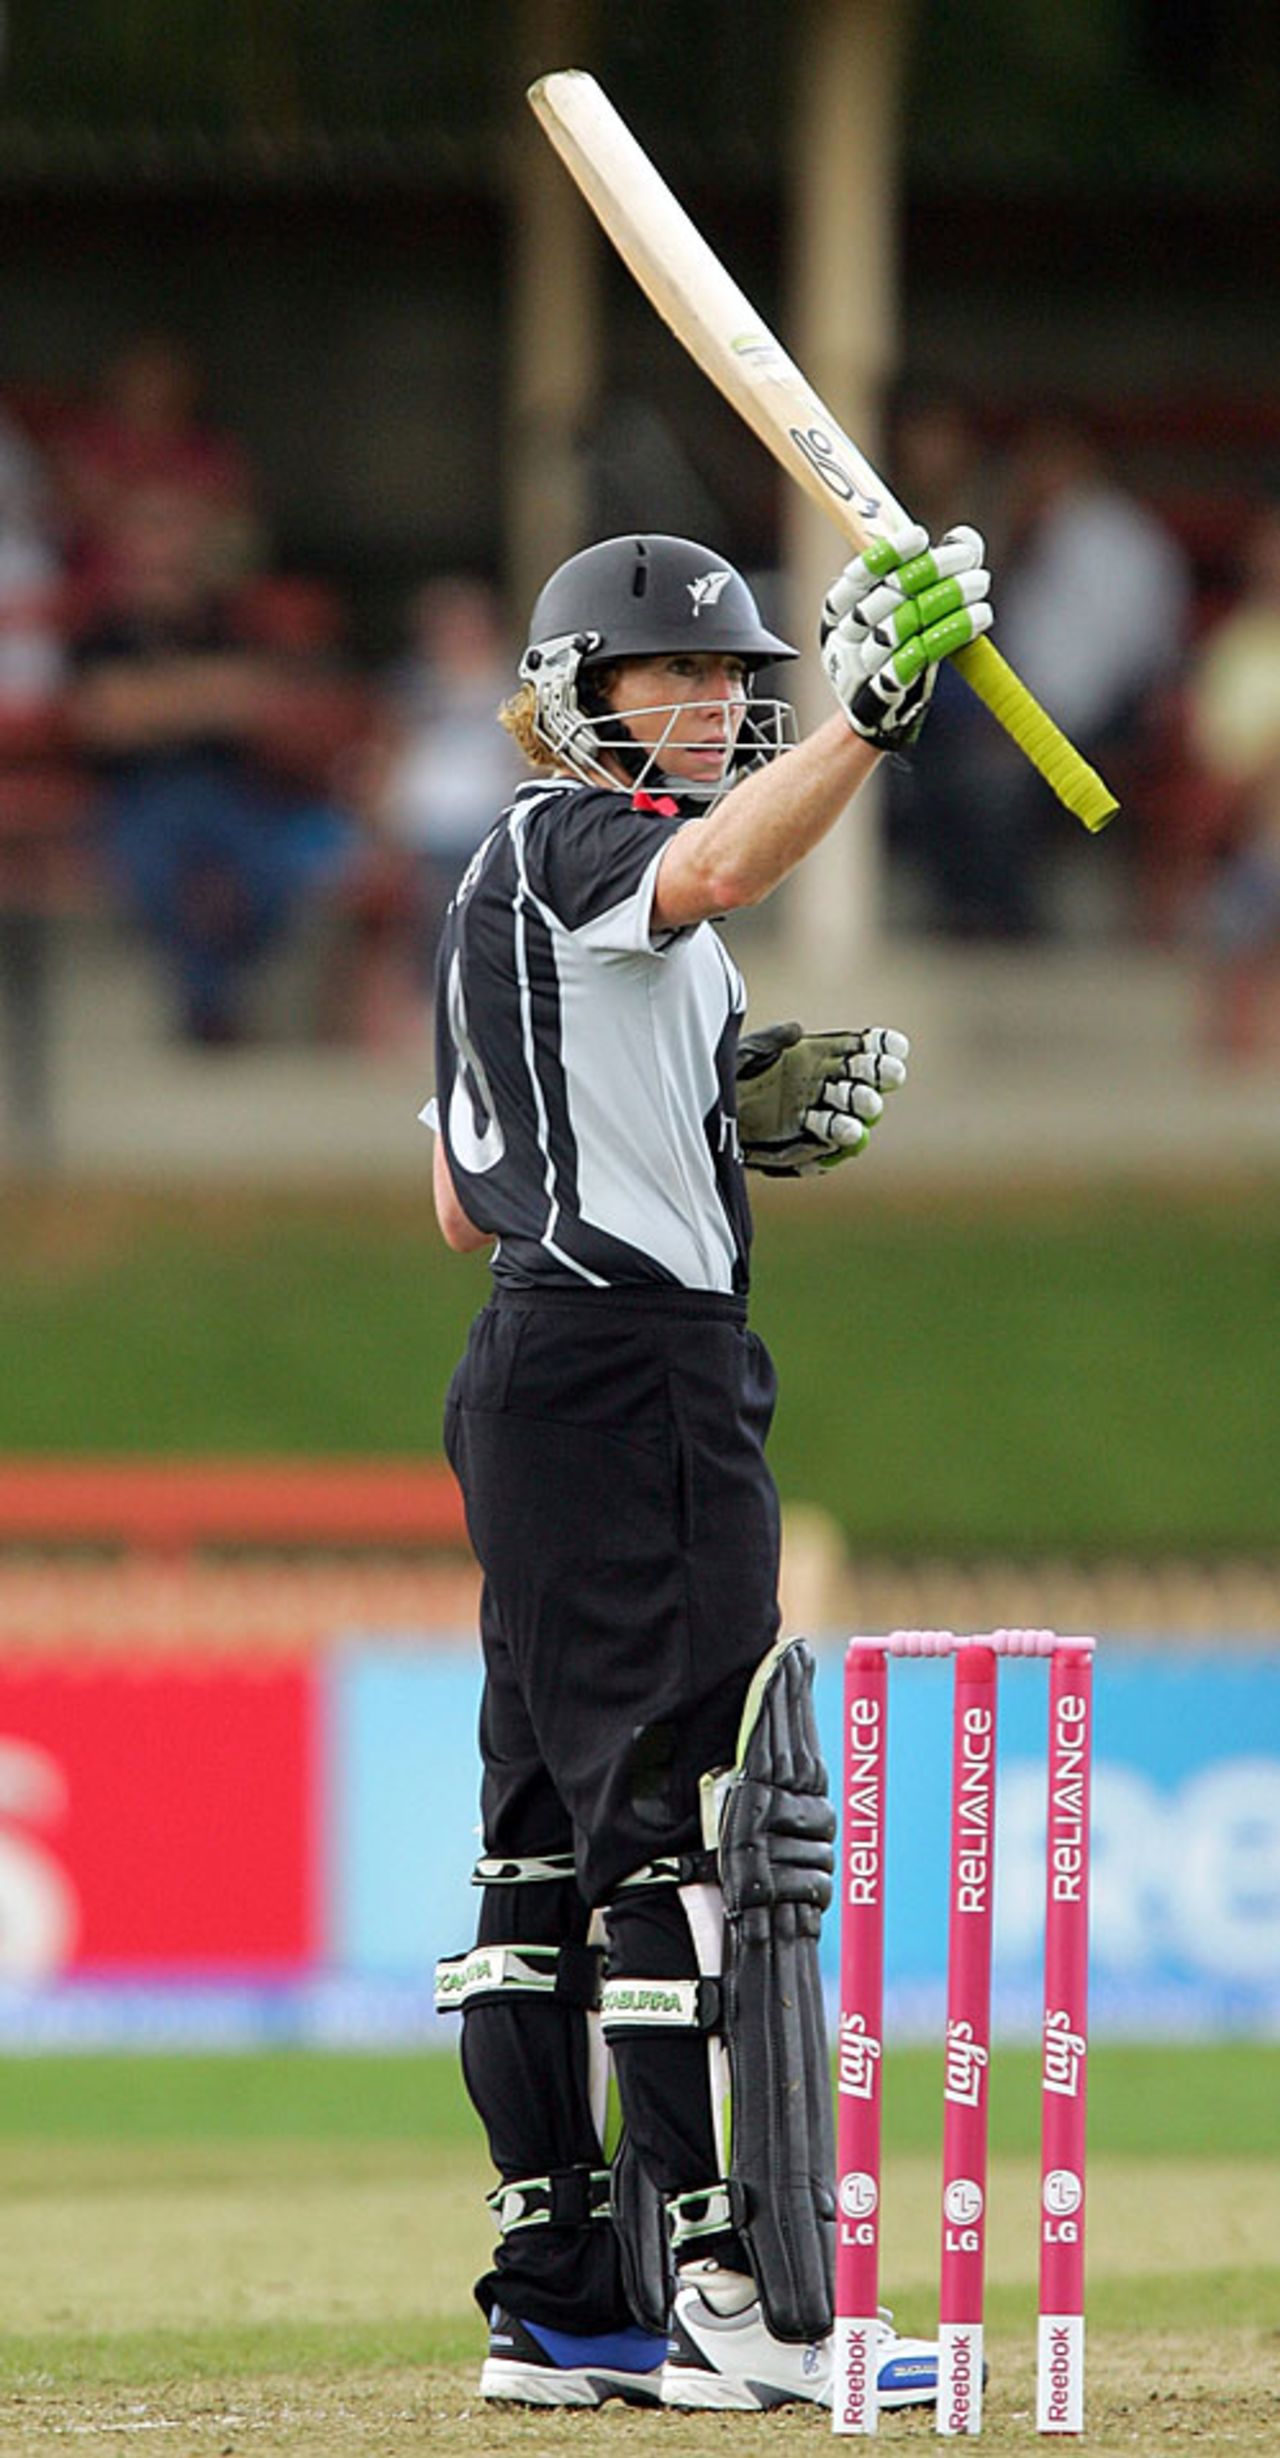 Haidee Tiffen raises the bat after scoring a half-century, Australia v New Zealand, Group A, women's World Cup, North Sydney Oval, March 8, 2009